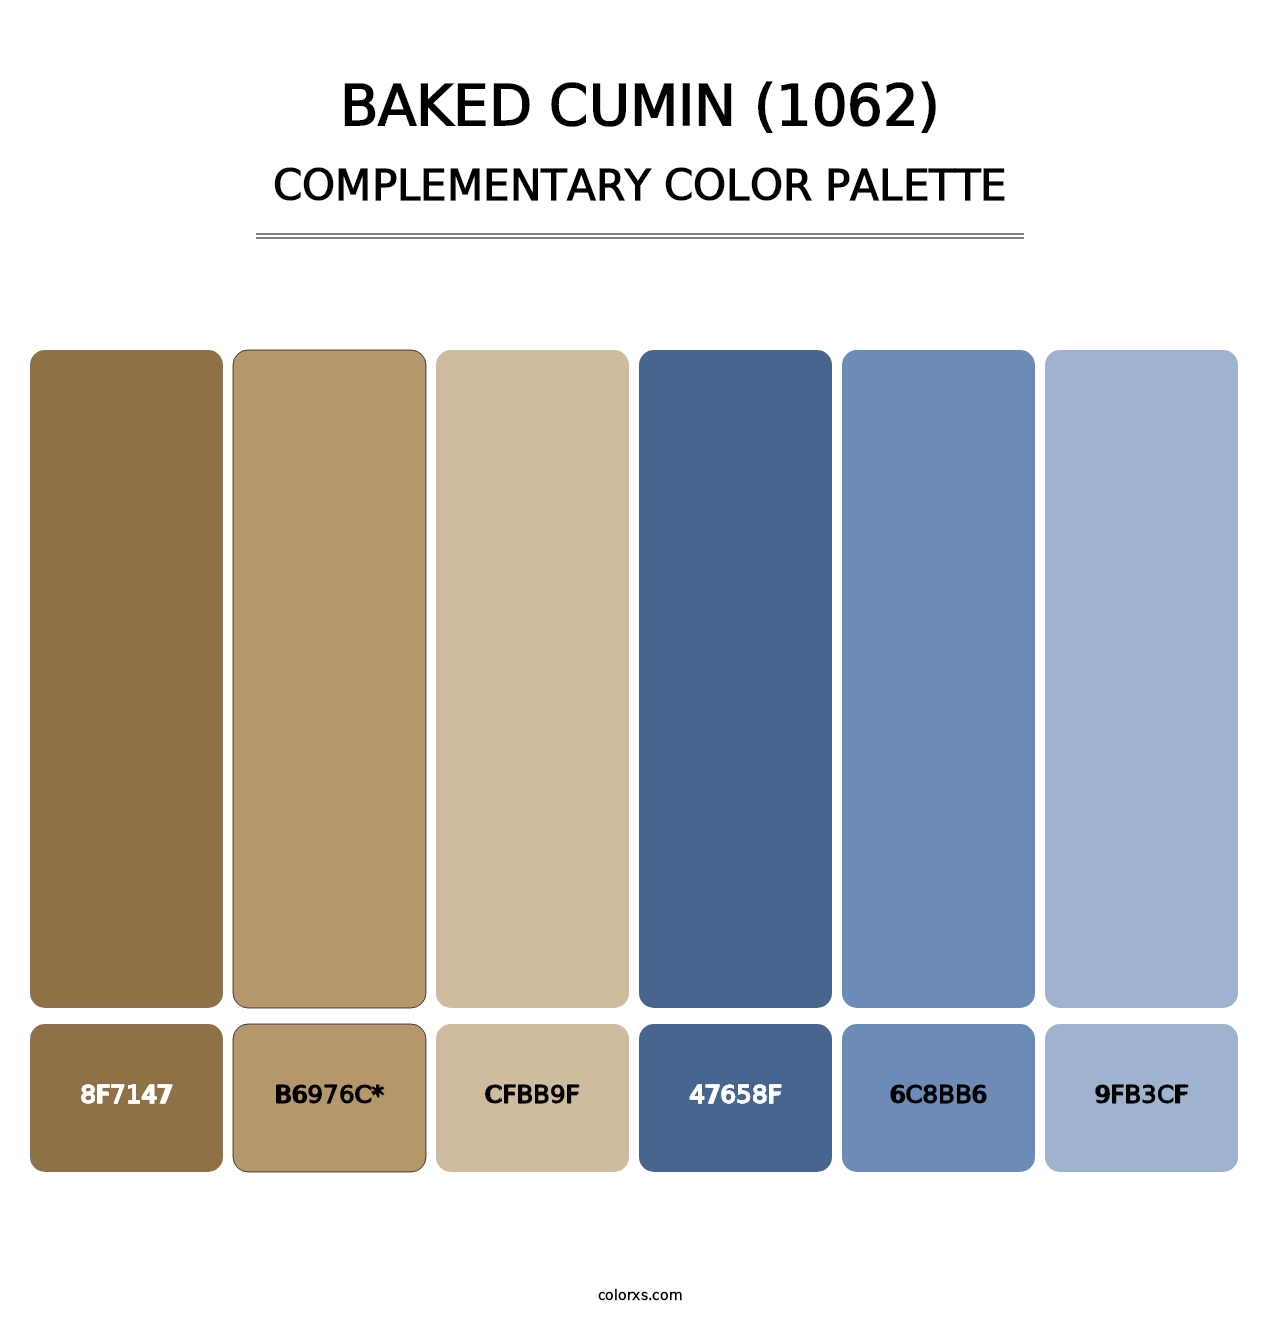 Baked Cumin (1062) - Complementary Color Palette